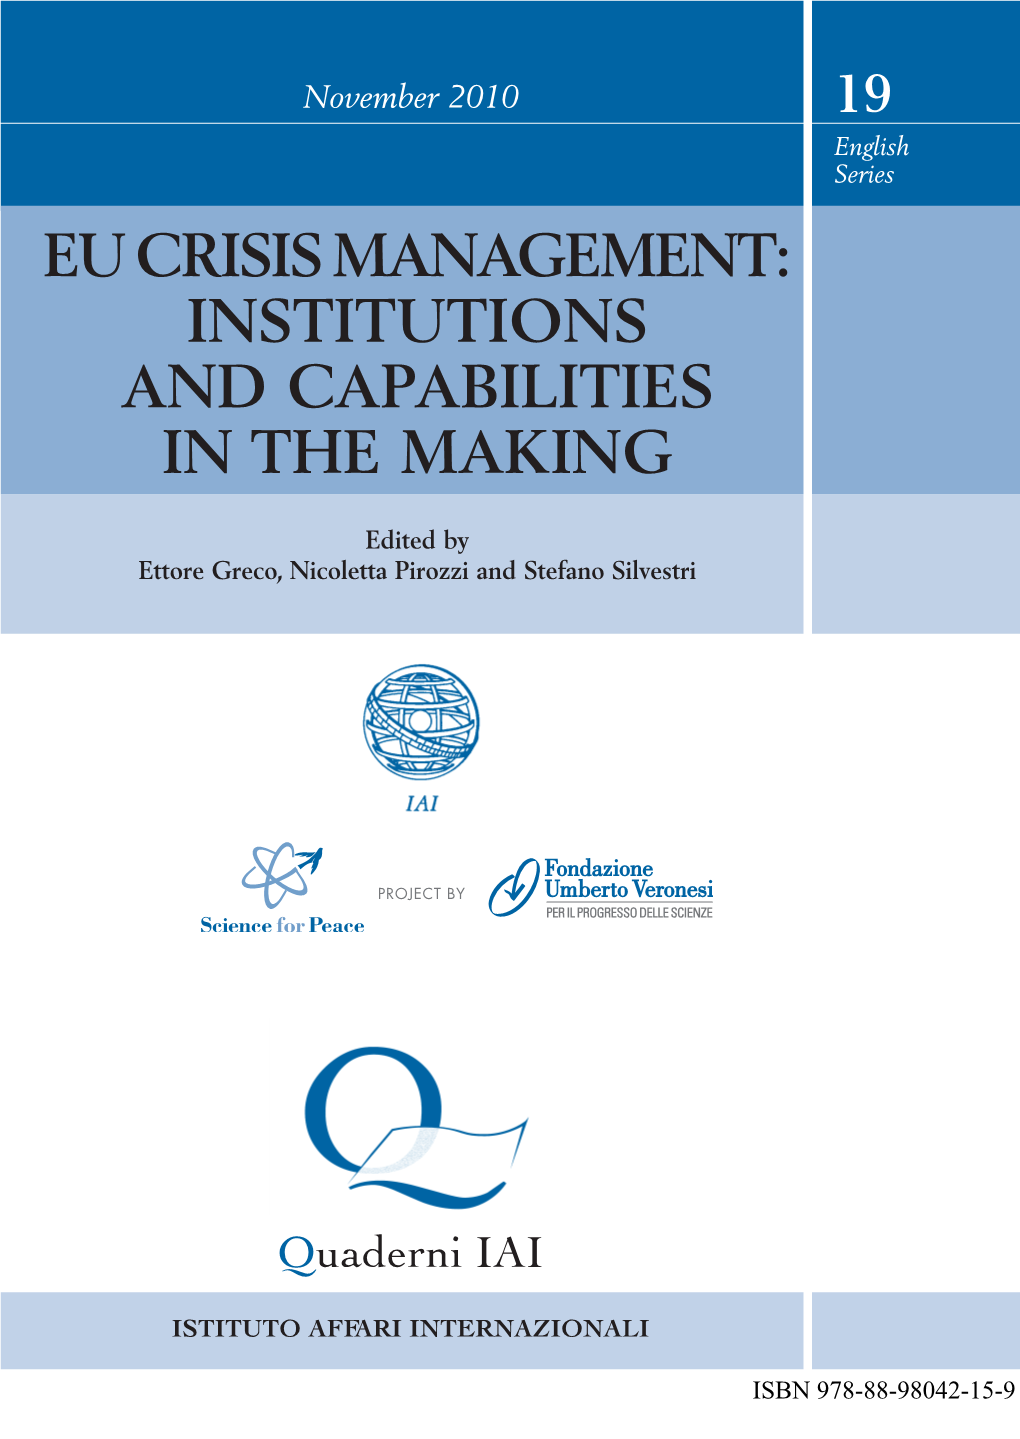 Eu Crisis Management: Institutions and Capabilities in the Making